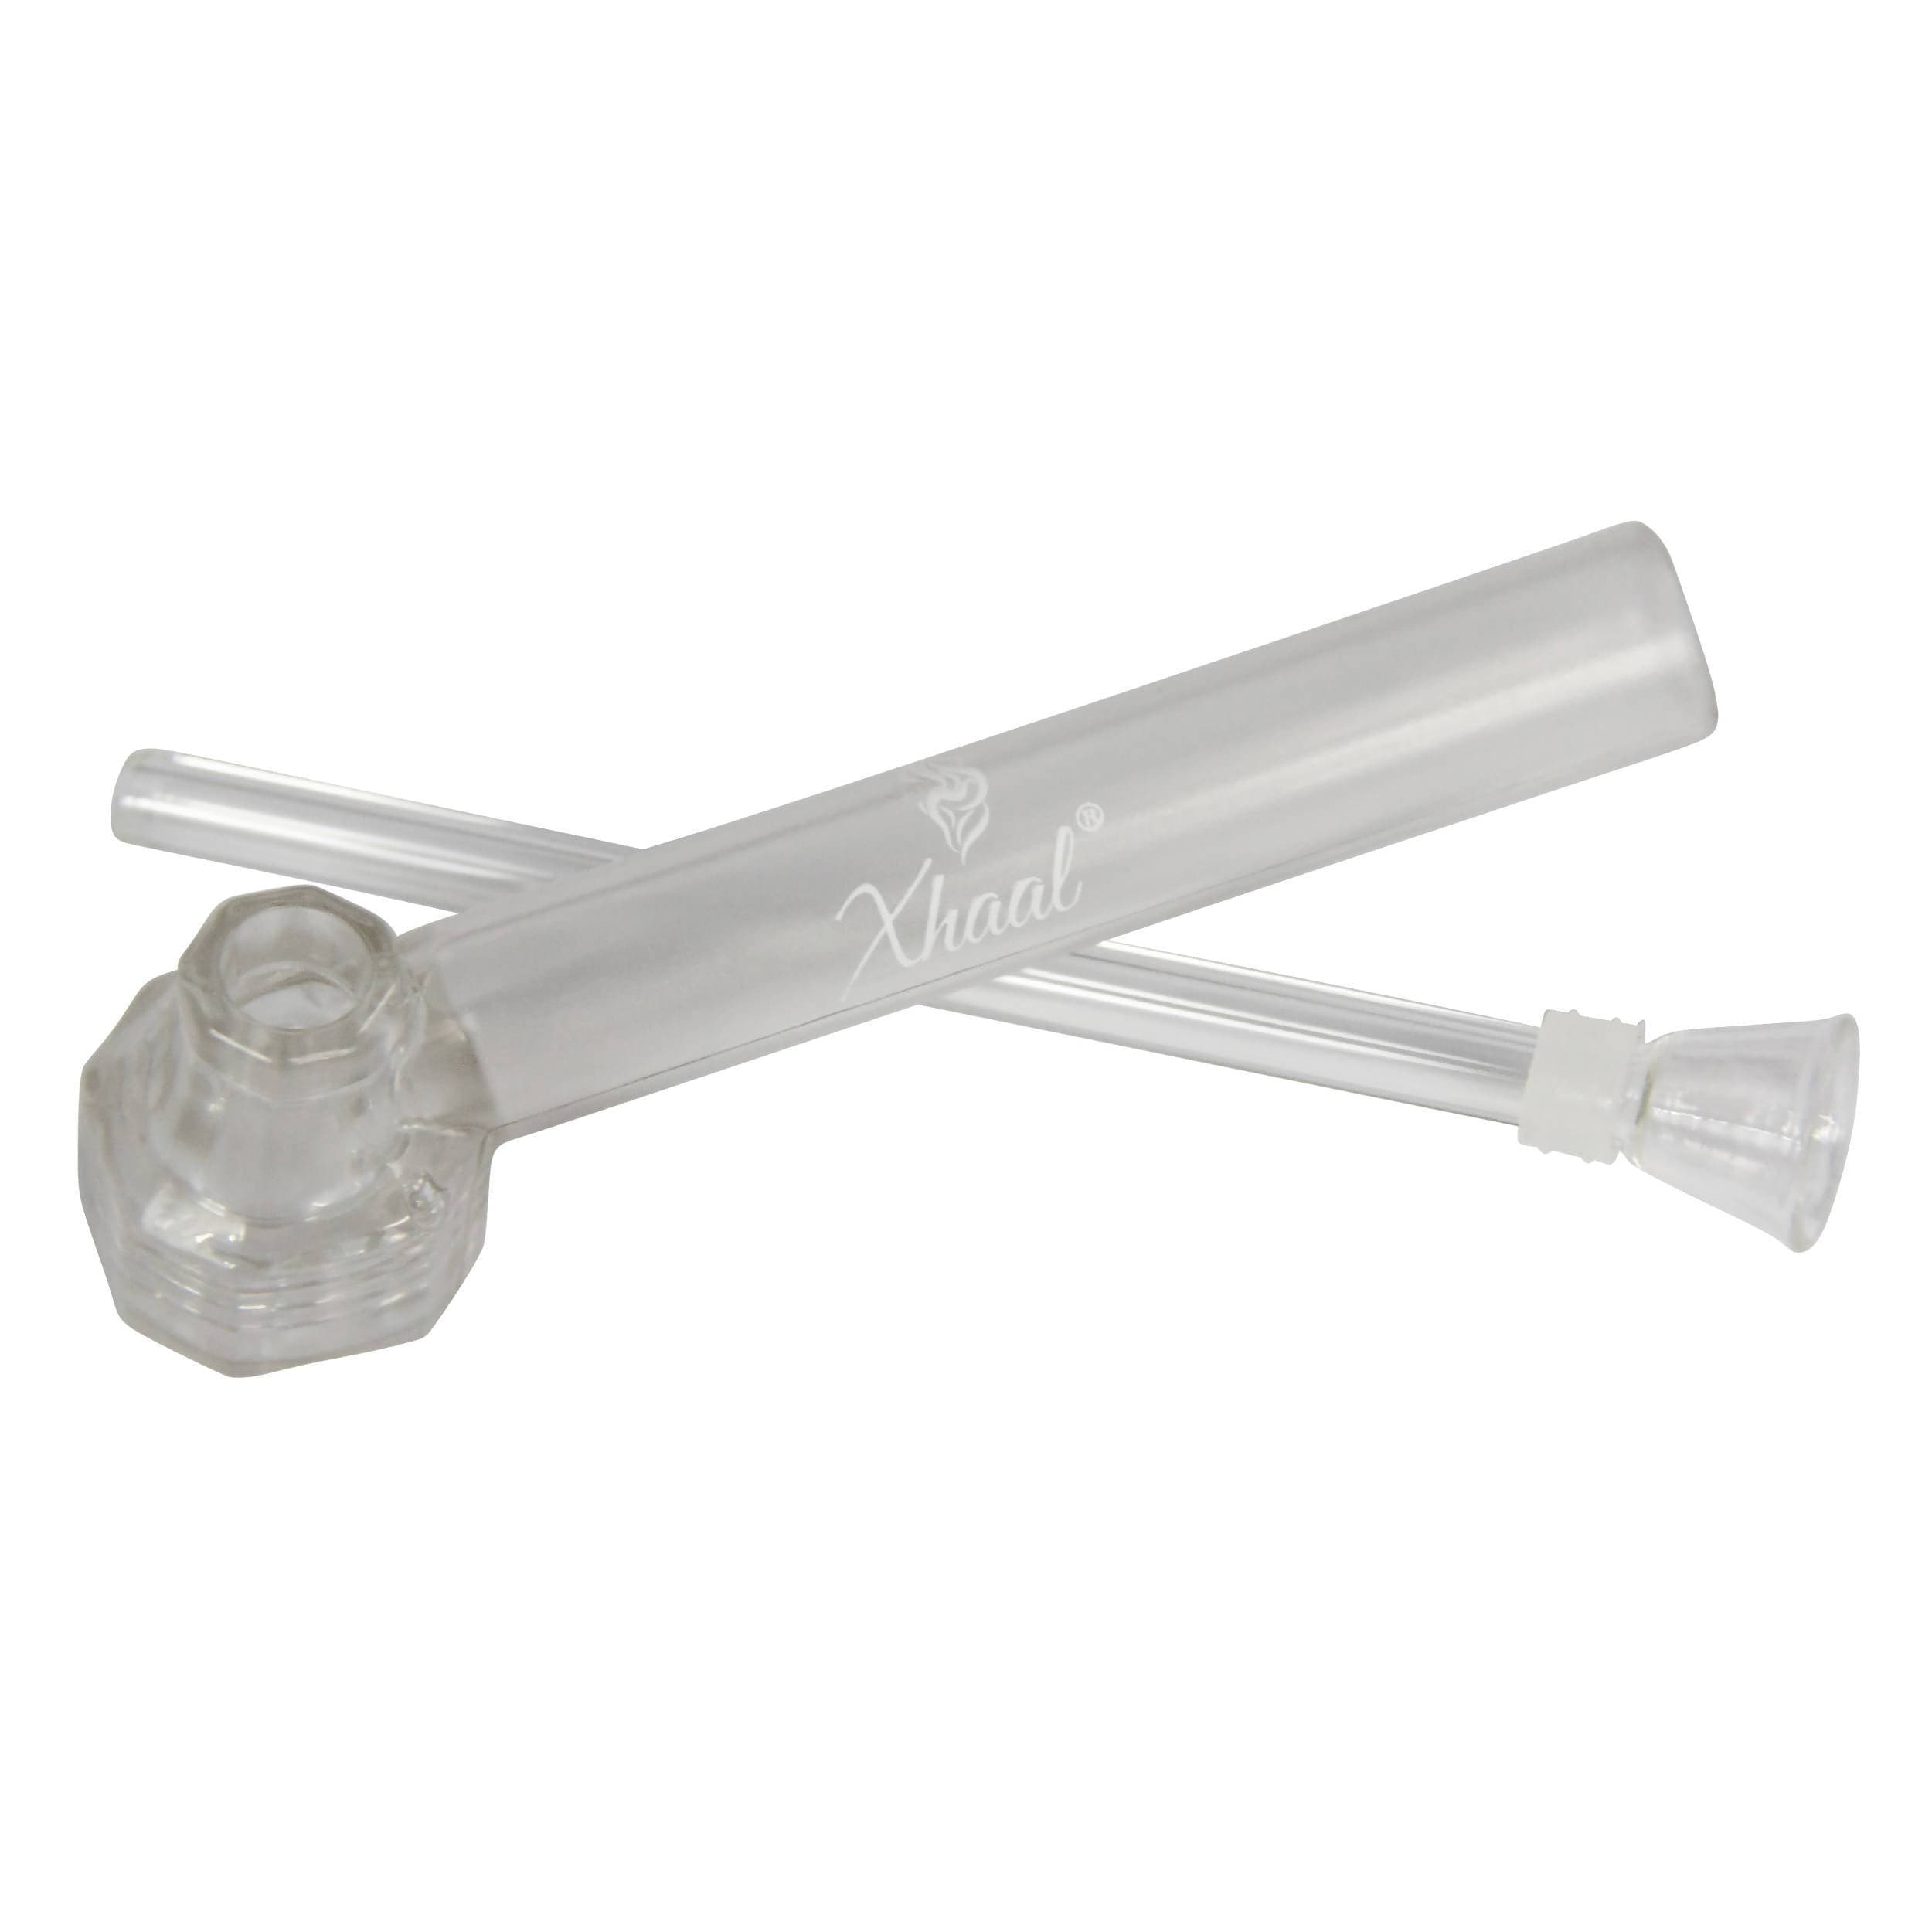 XBong | Water Pipe | Box of 12